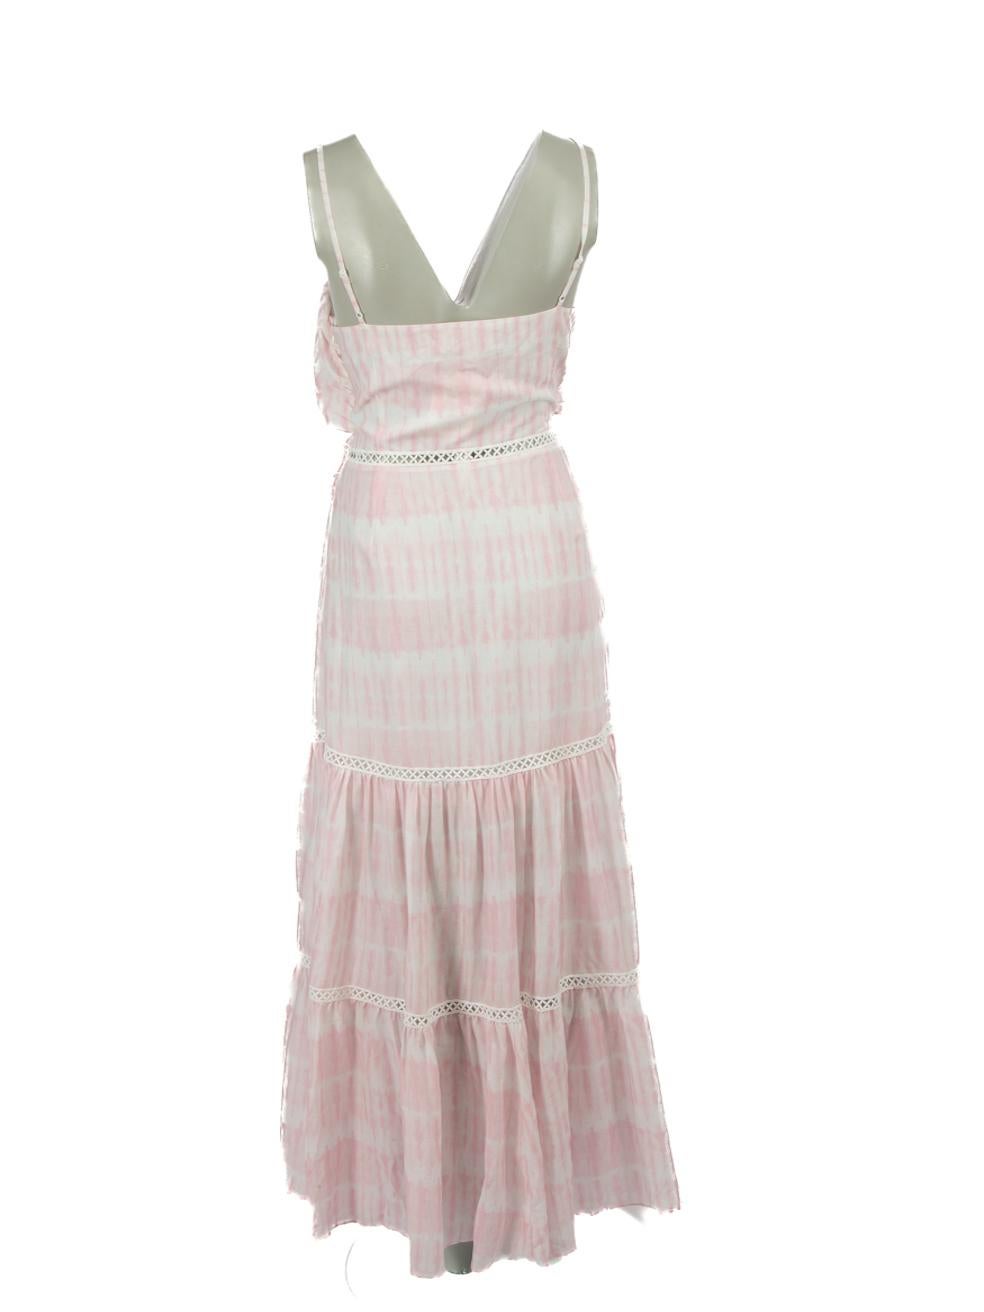 Jonathan Simkhai Pink Tie-Dye Tiered Ruffle Maxi Dress Size M In New Condition For Sale In London, GB